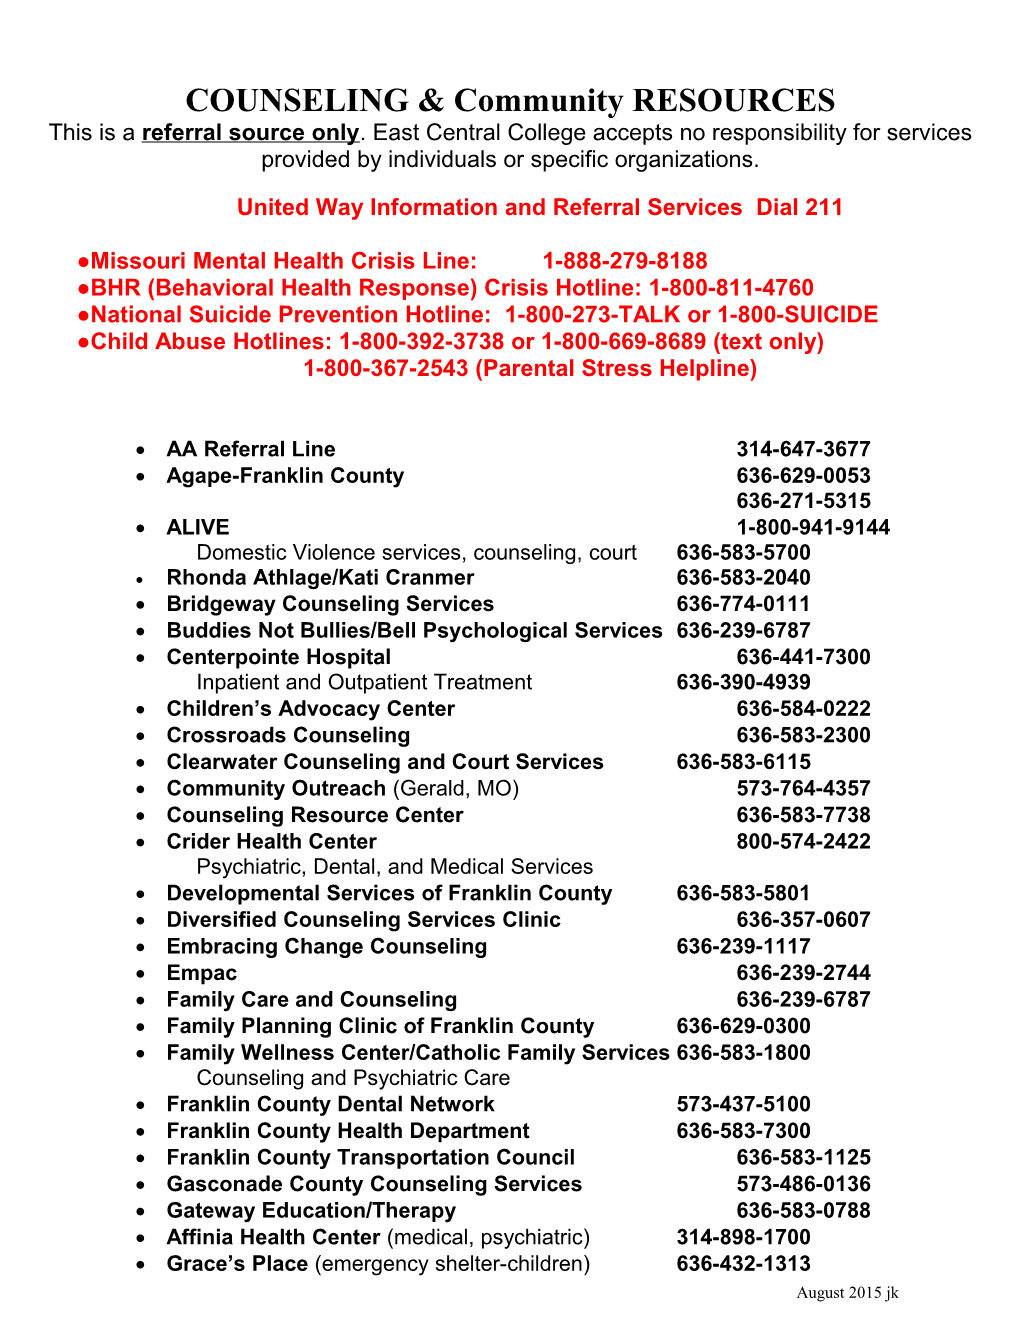 United Way Information and Referral Services Dial 211